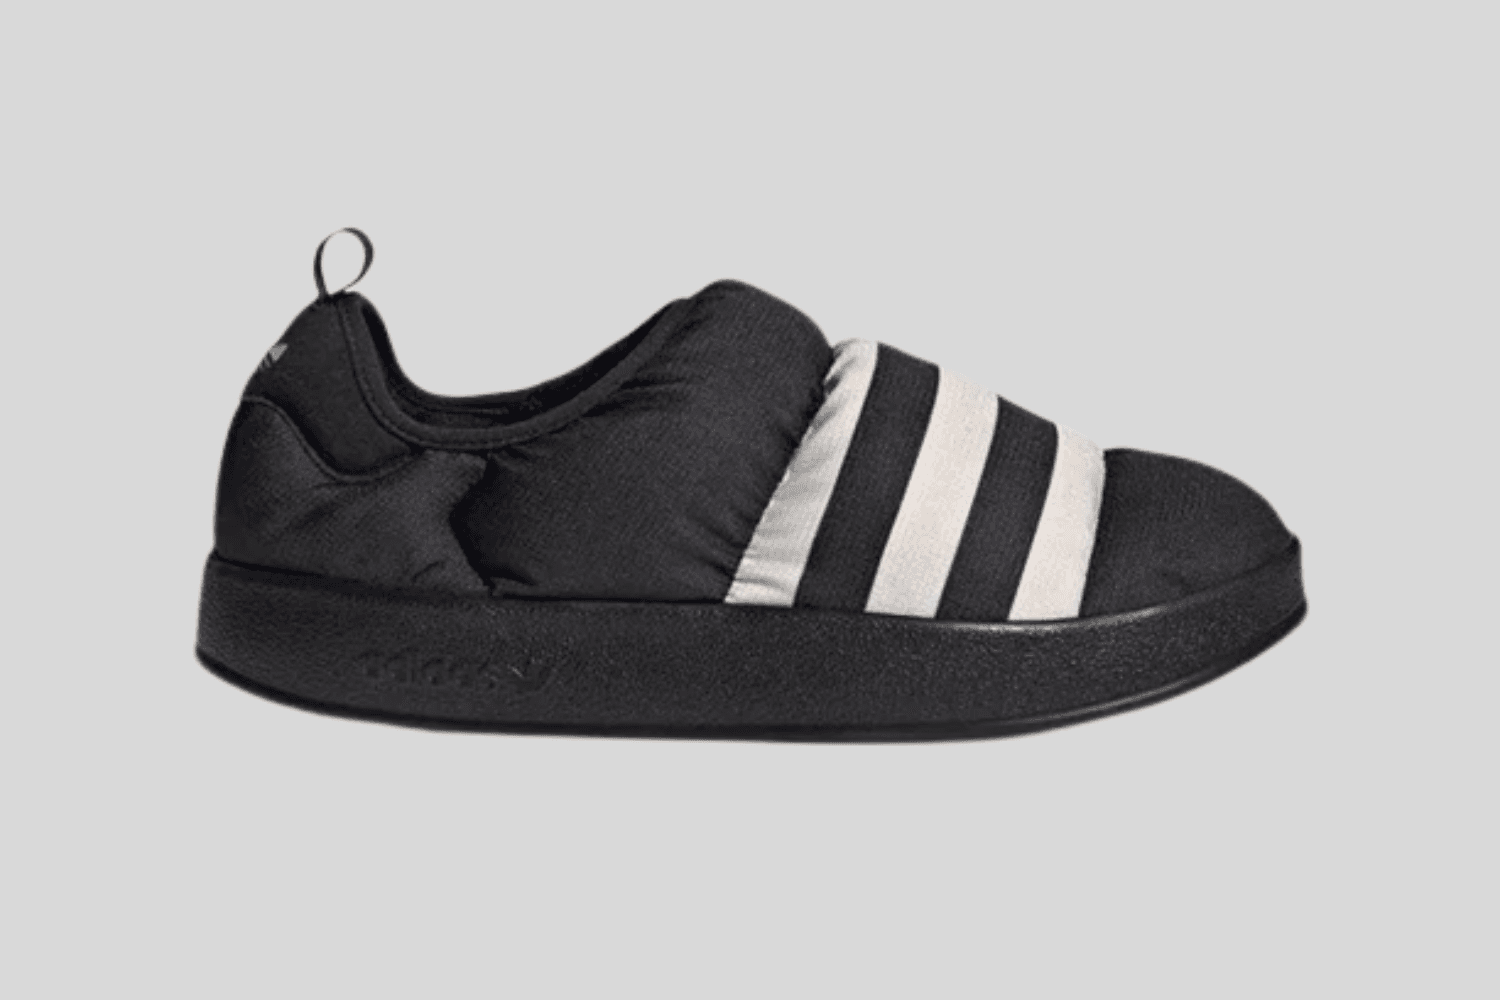 Have you heard about the adidas Puffylette?